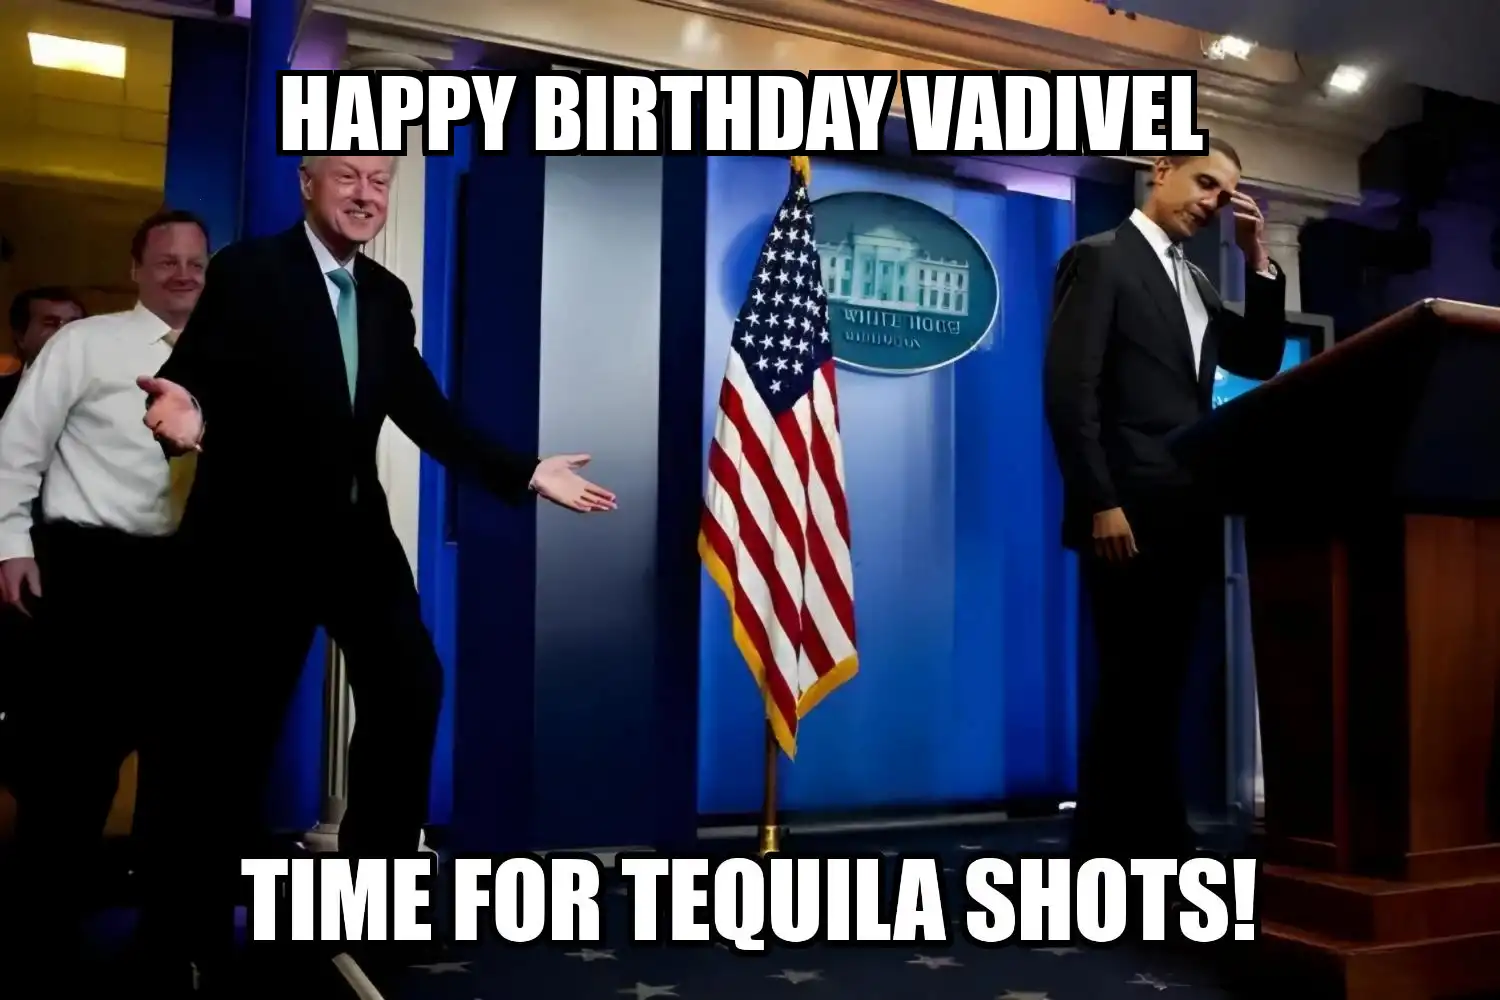 Happy Birthday Vadivel Time For Tequila Shots Memes